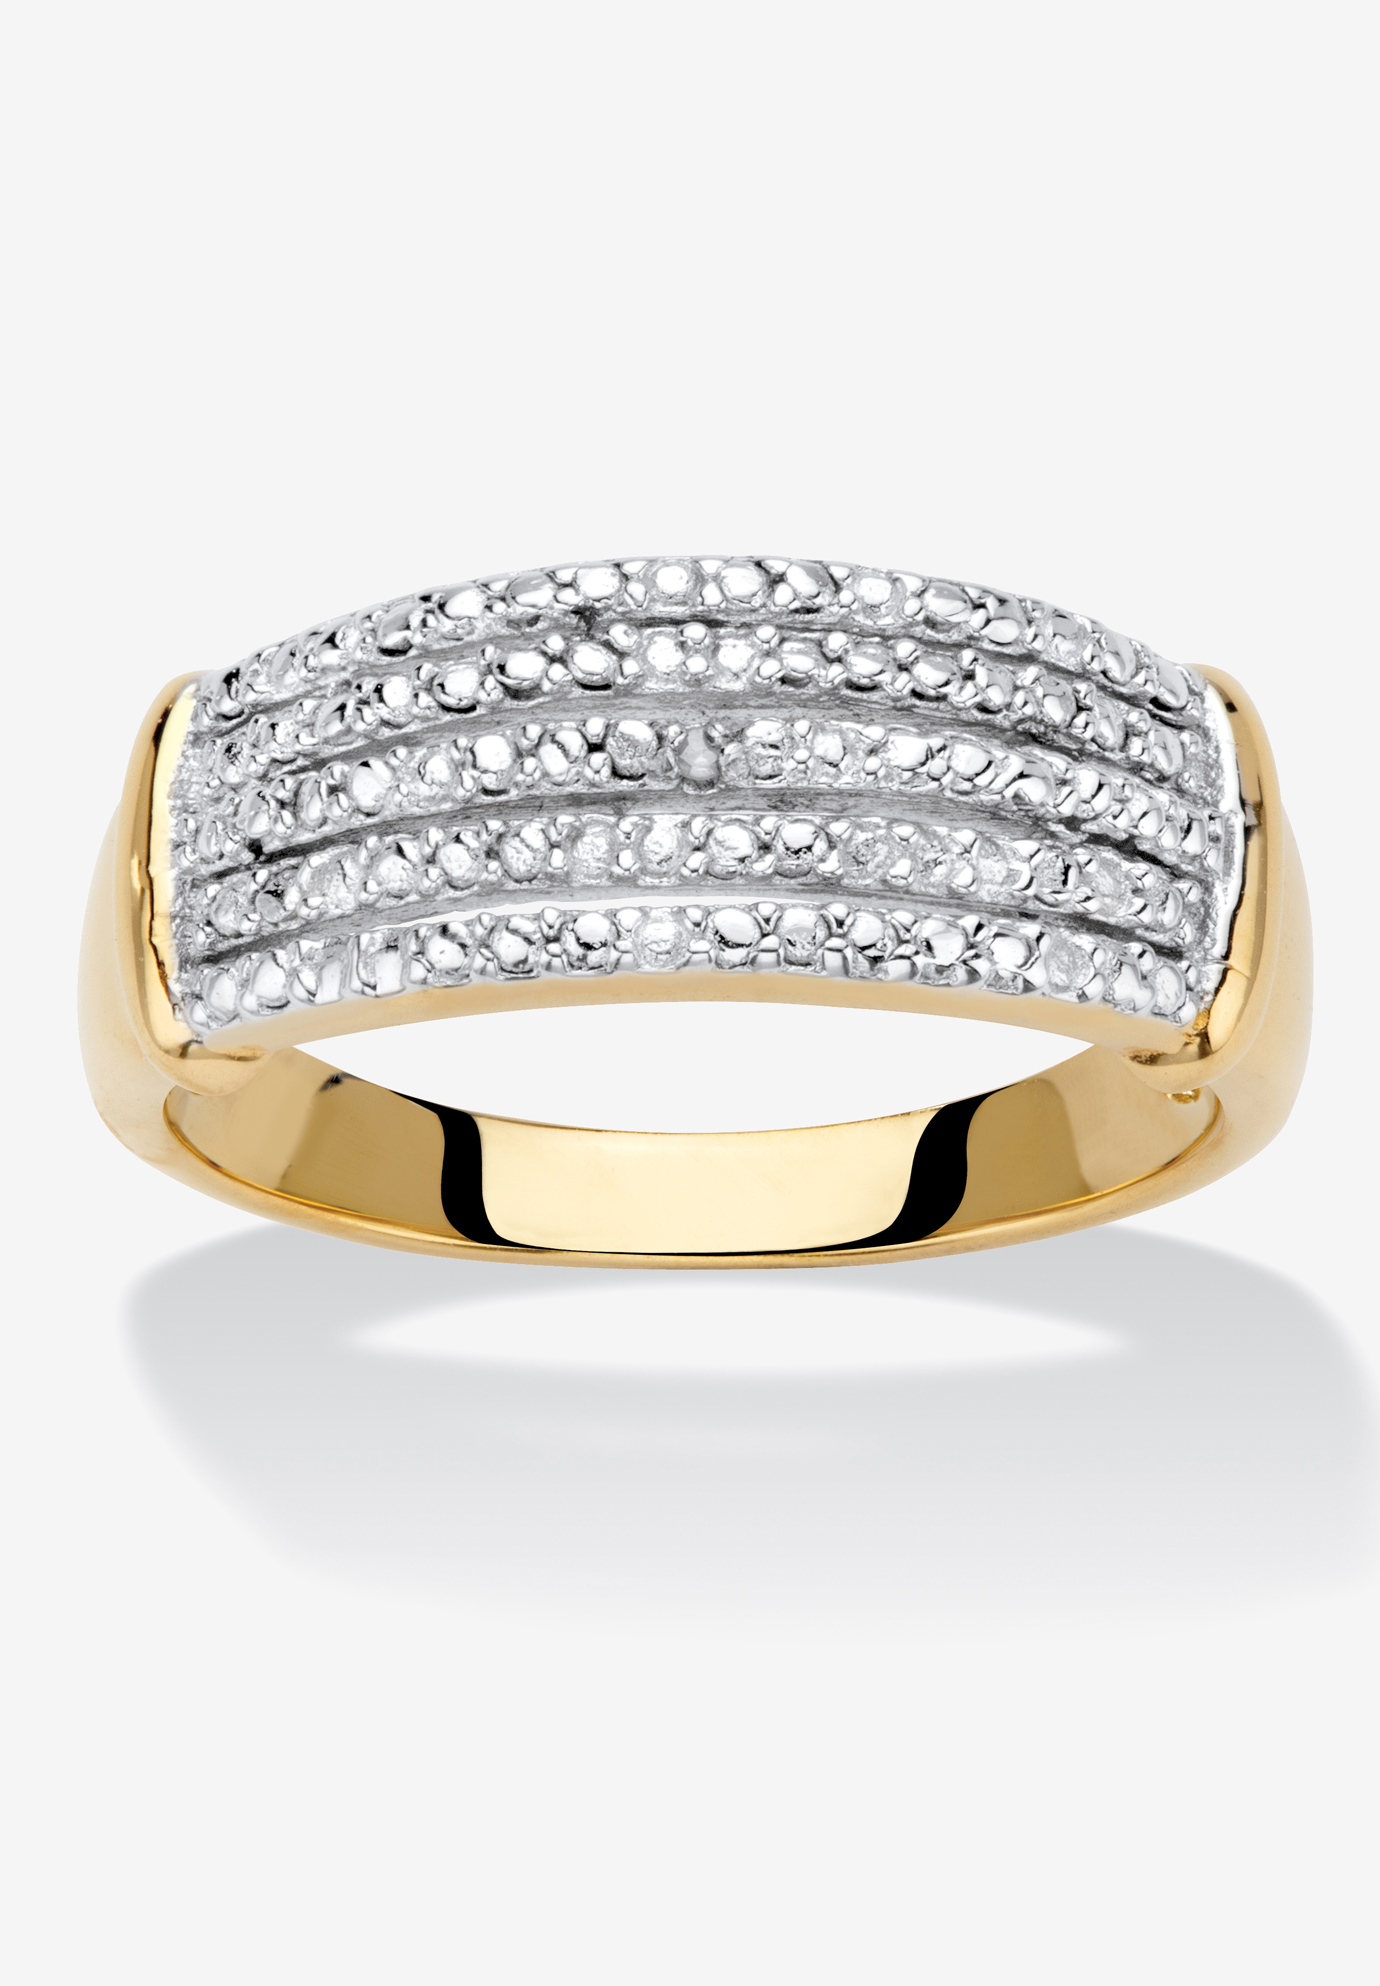 Yellow Gold-Plated Anniversary Ring with Genuine Diamond Accents, 